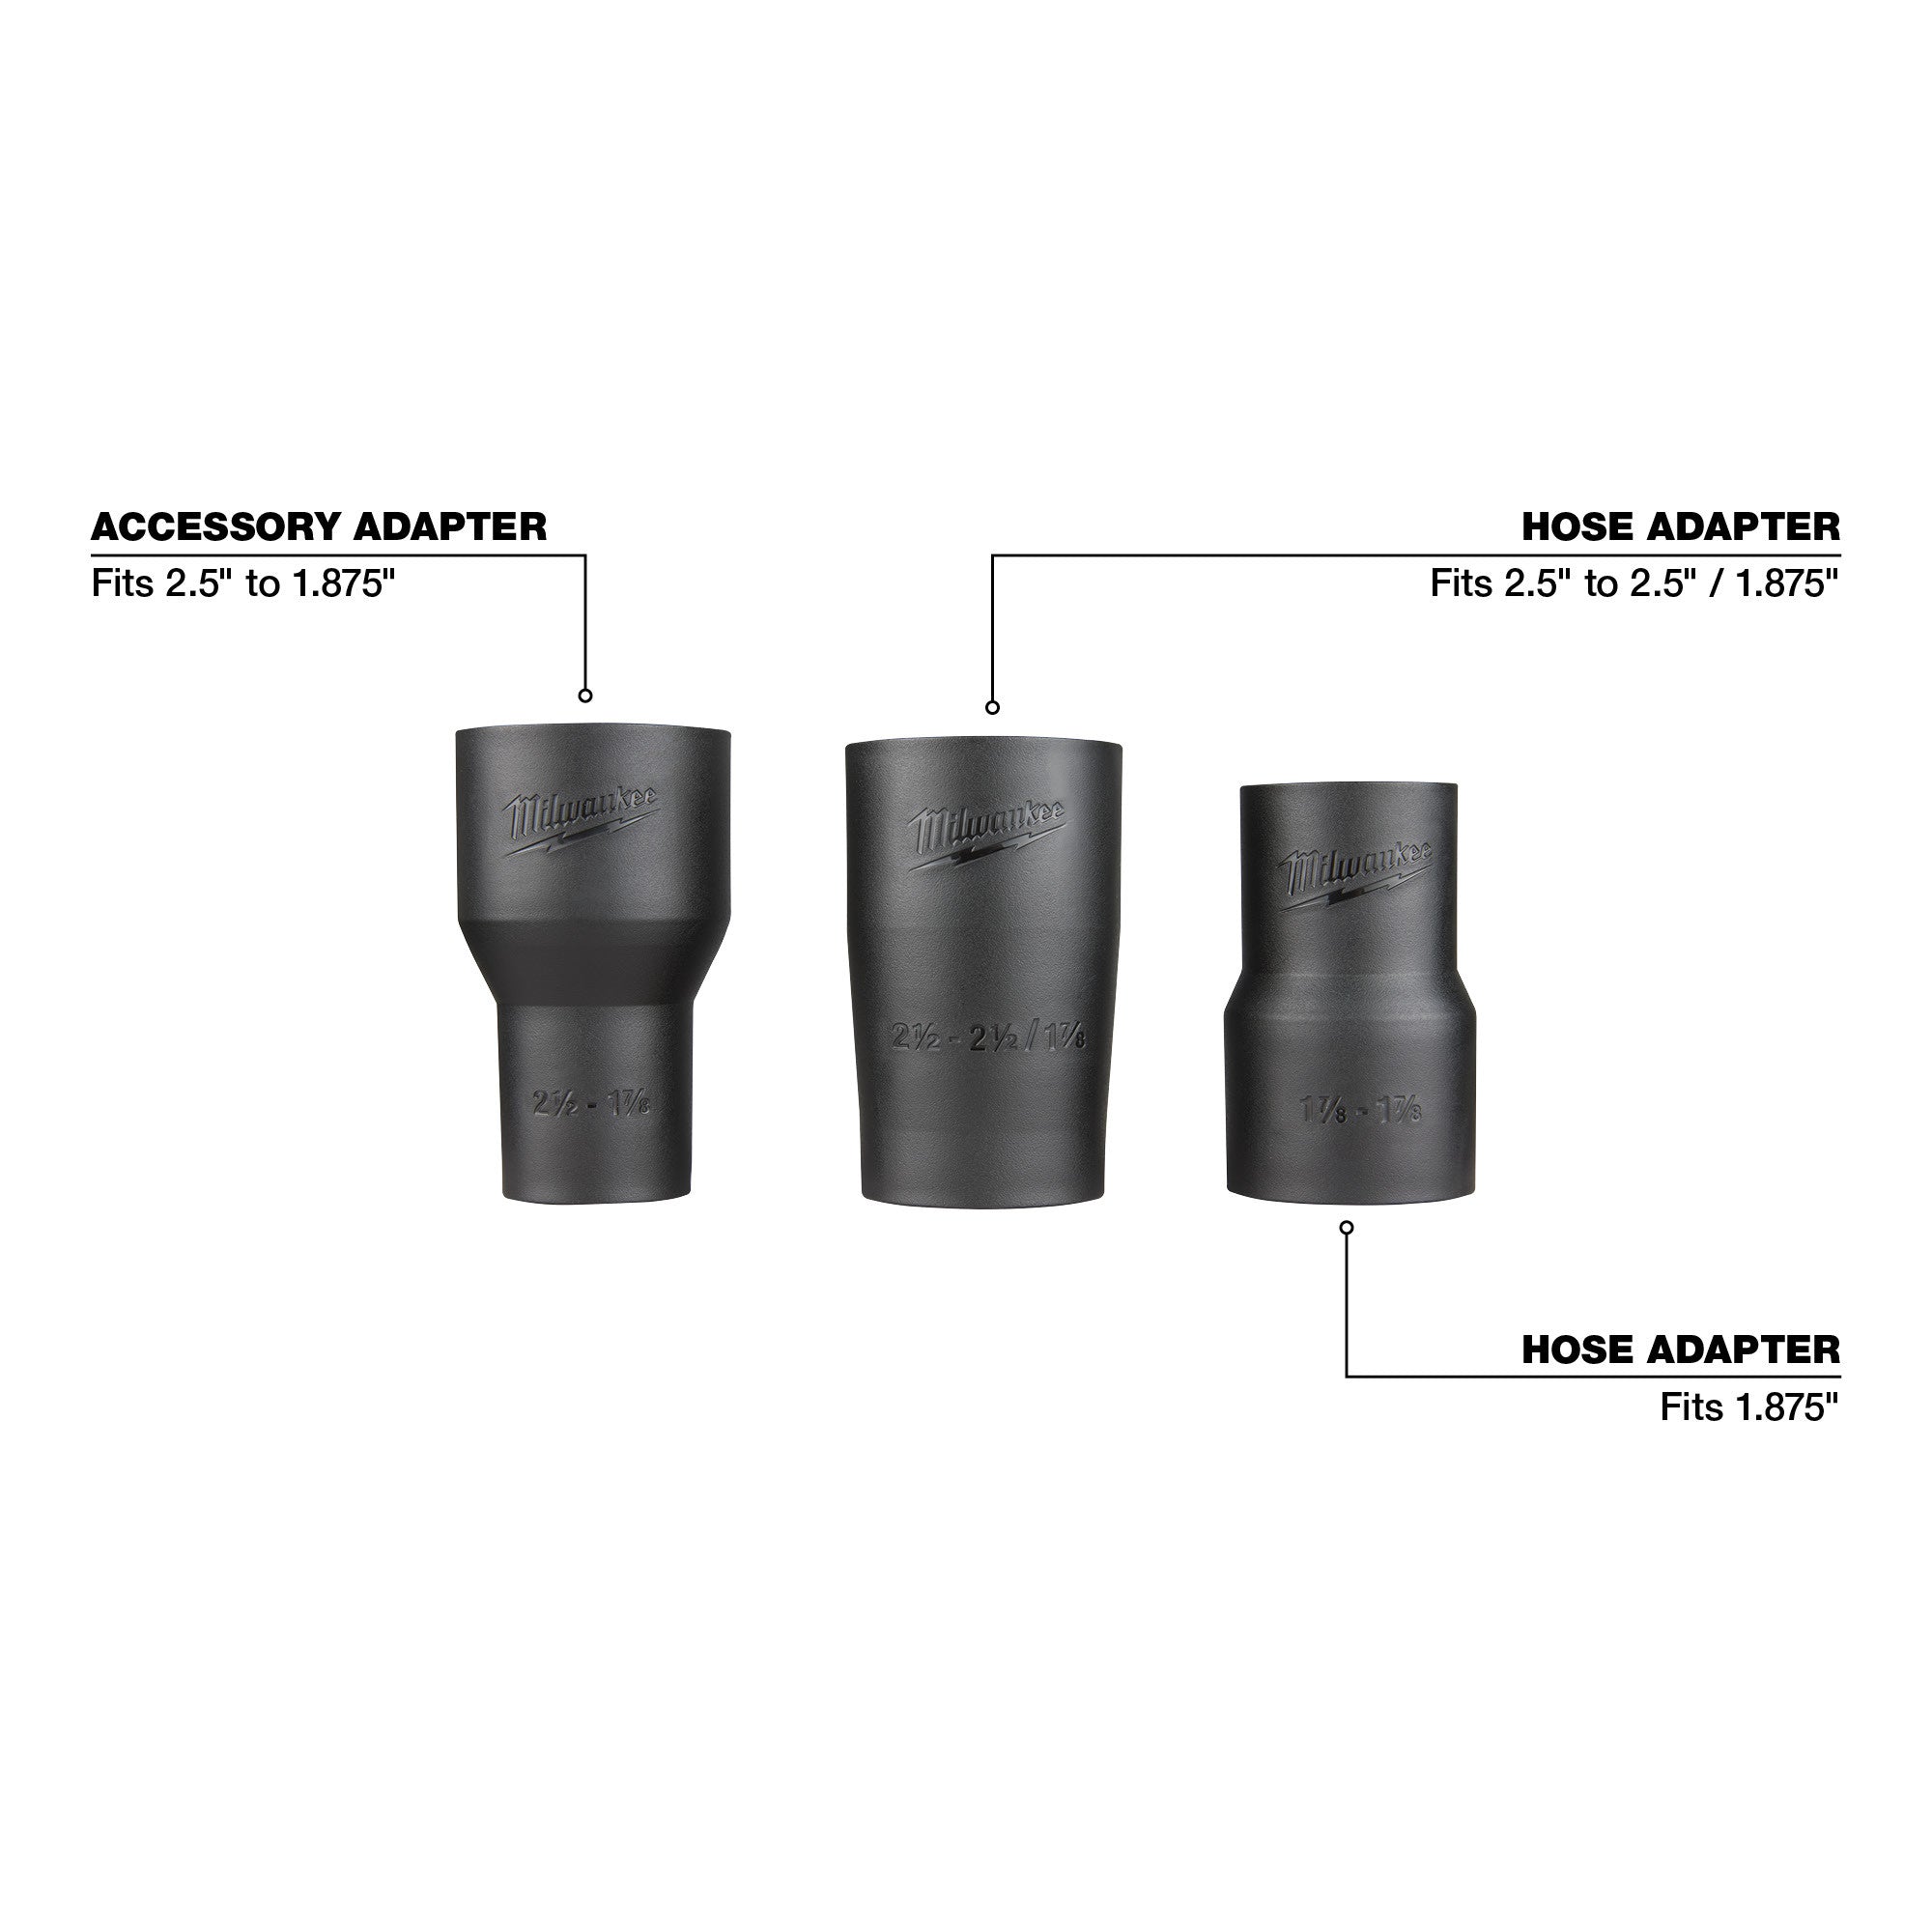 Hose and Accessory Adaptor Kit